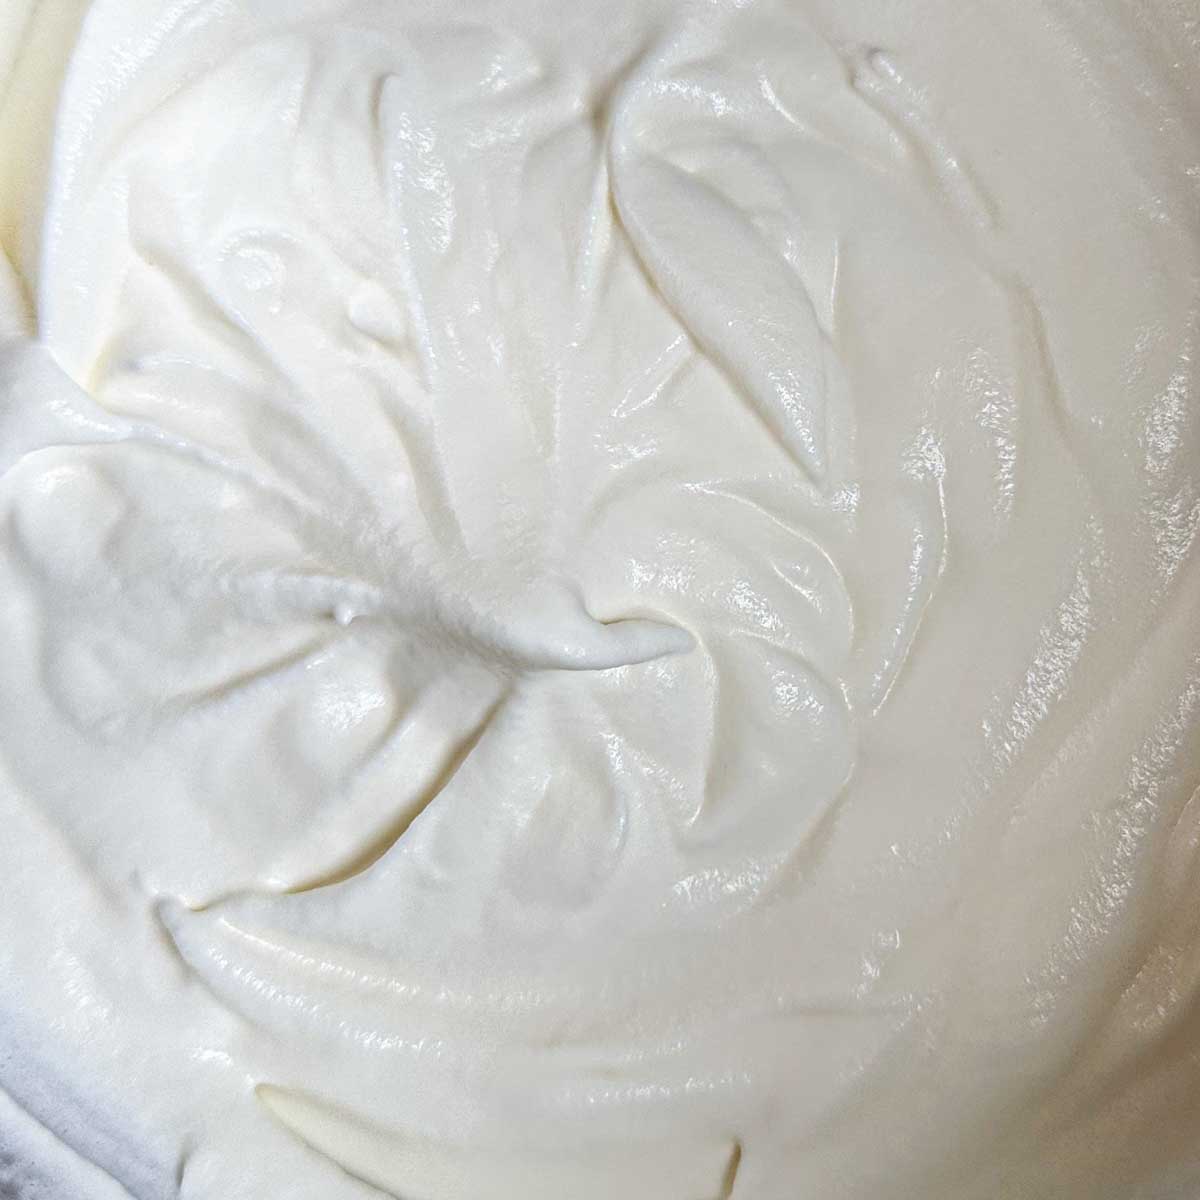 Whipped cream whipped to stiff peaks